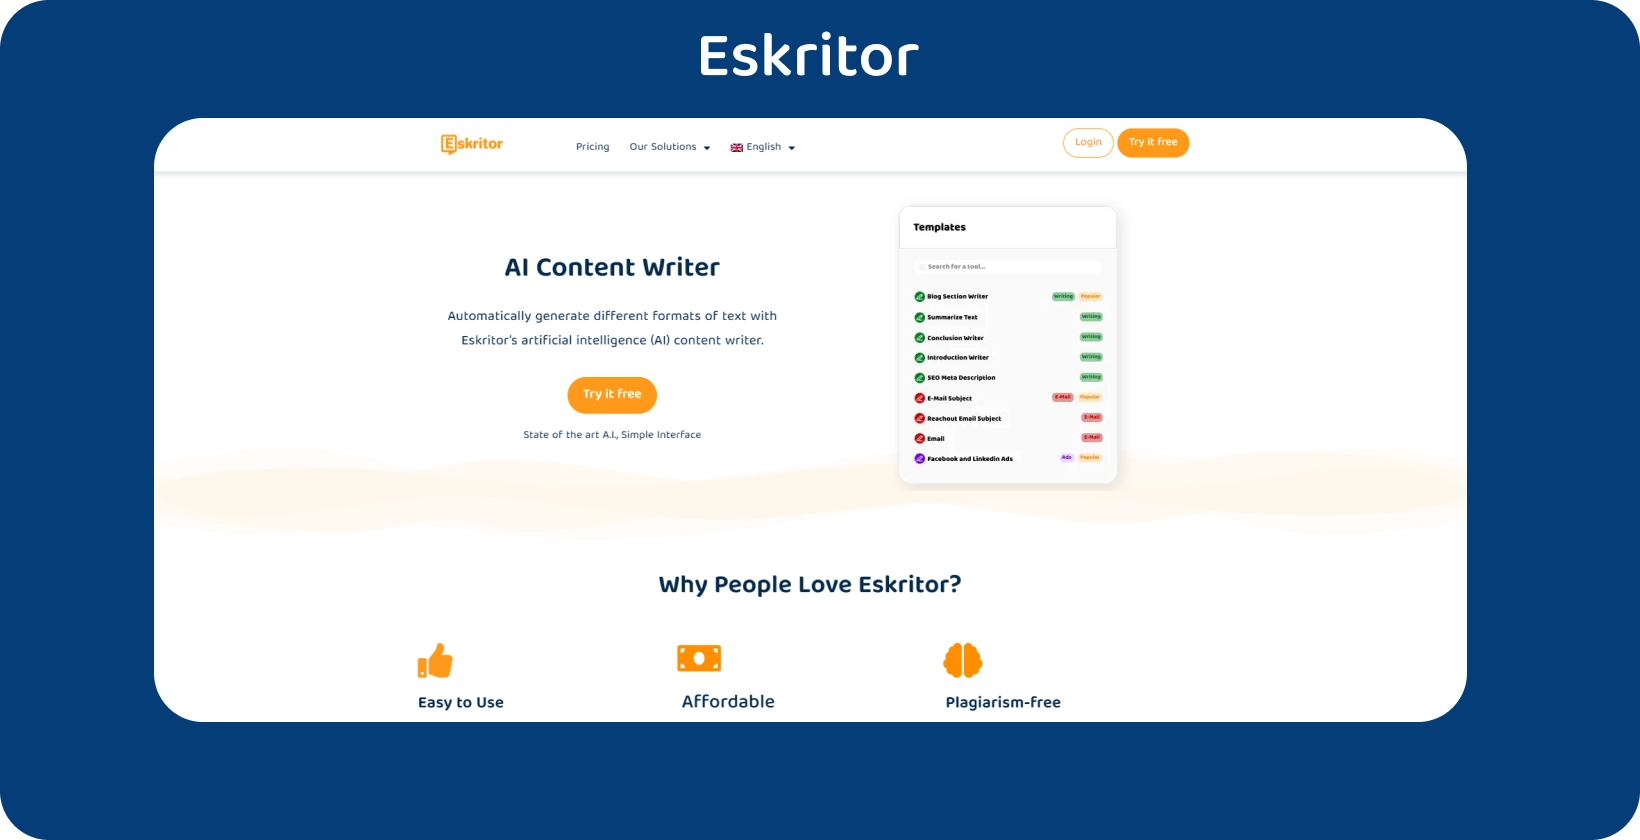 Eskritor's AI text editor interface ready to generate text based on user input.